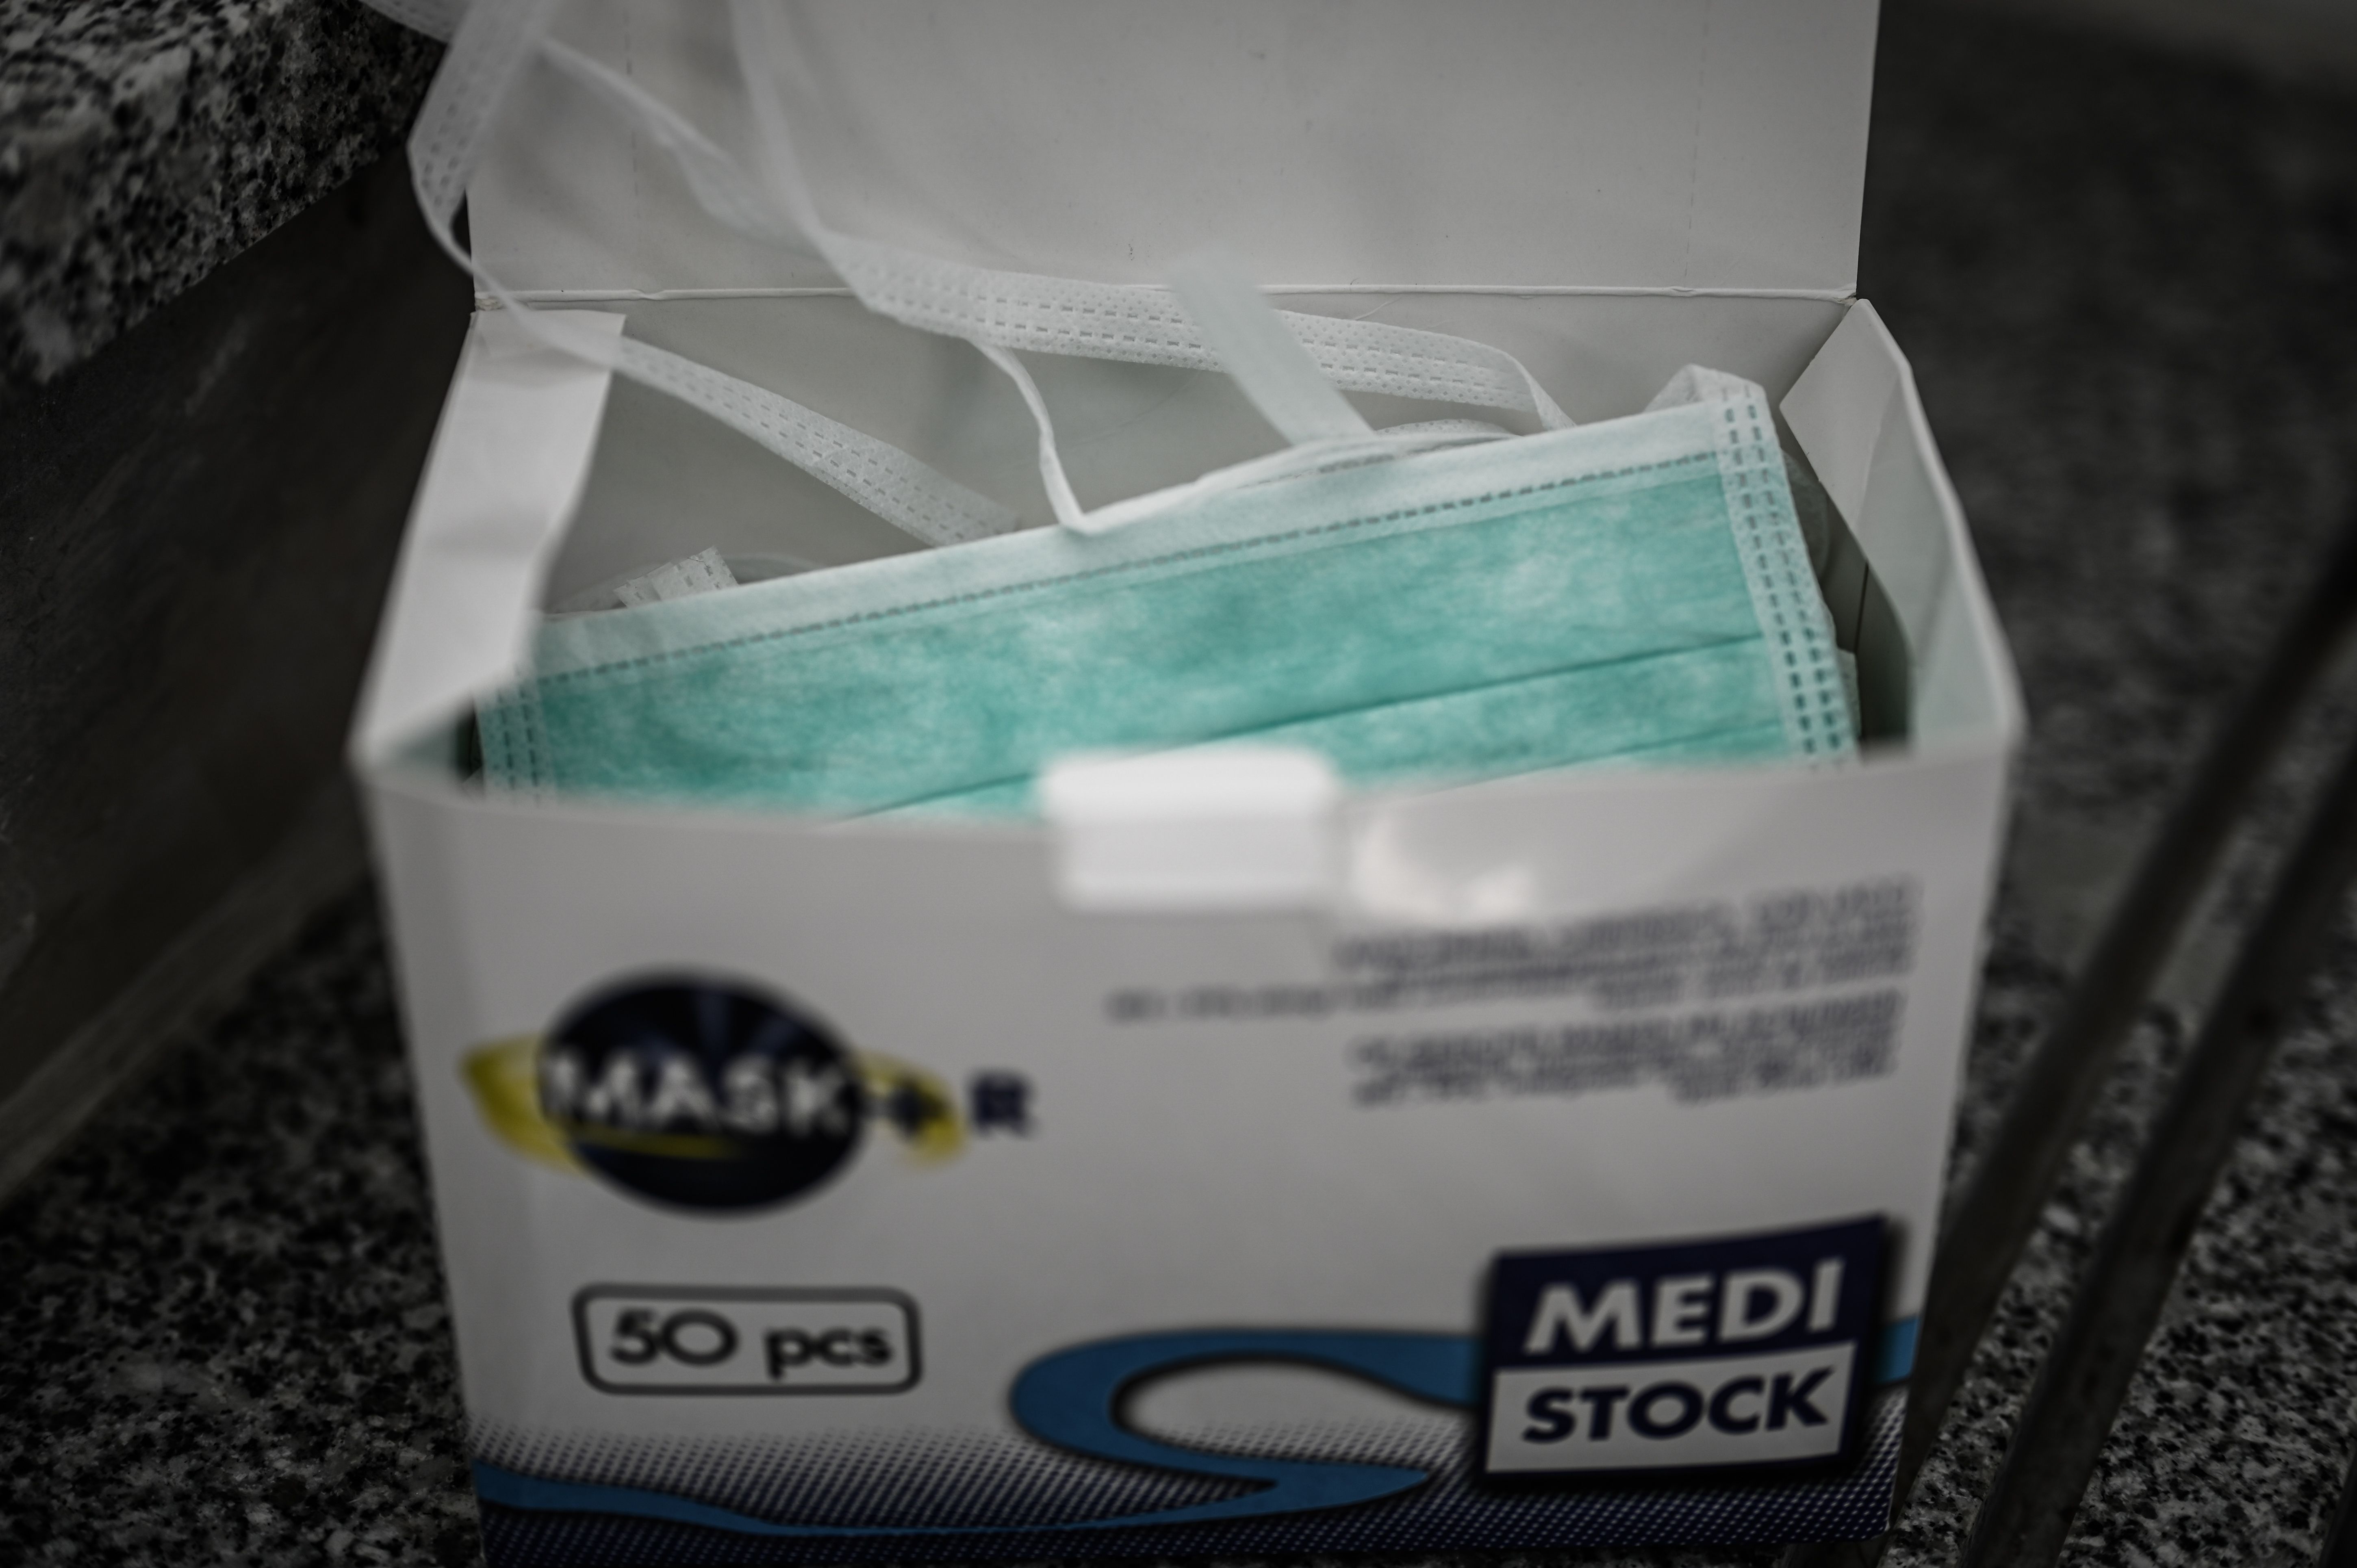 A box of protective masks at the medical center for testing patient for the COVID-19 virus, in Paris on Friday, March 27.